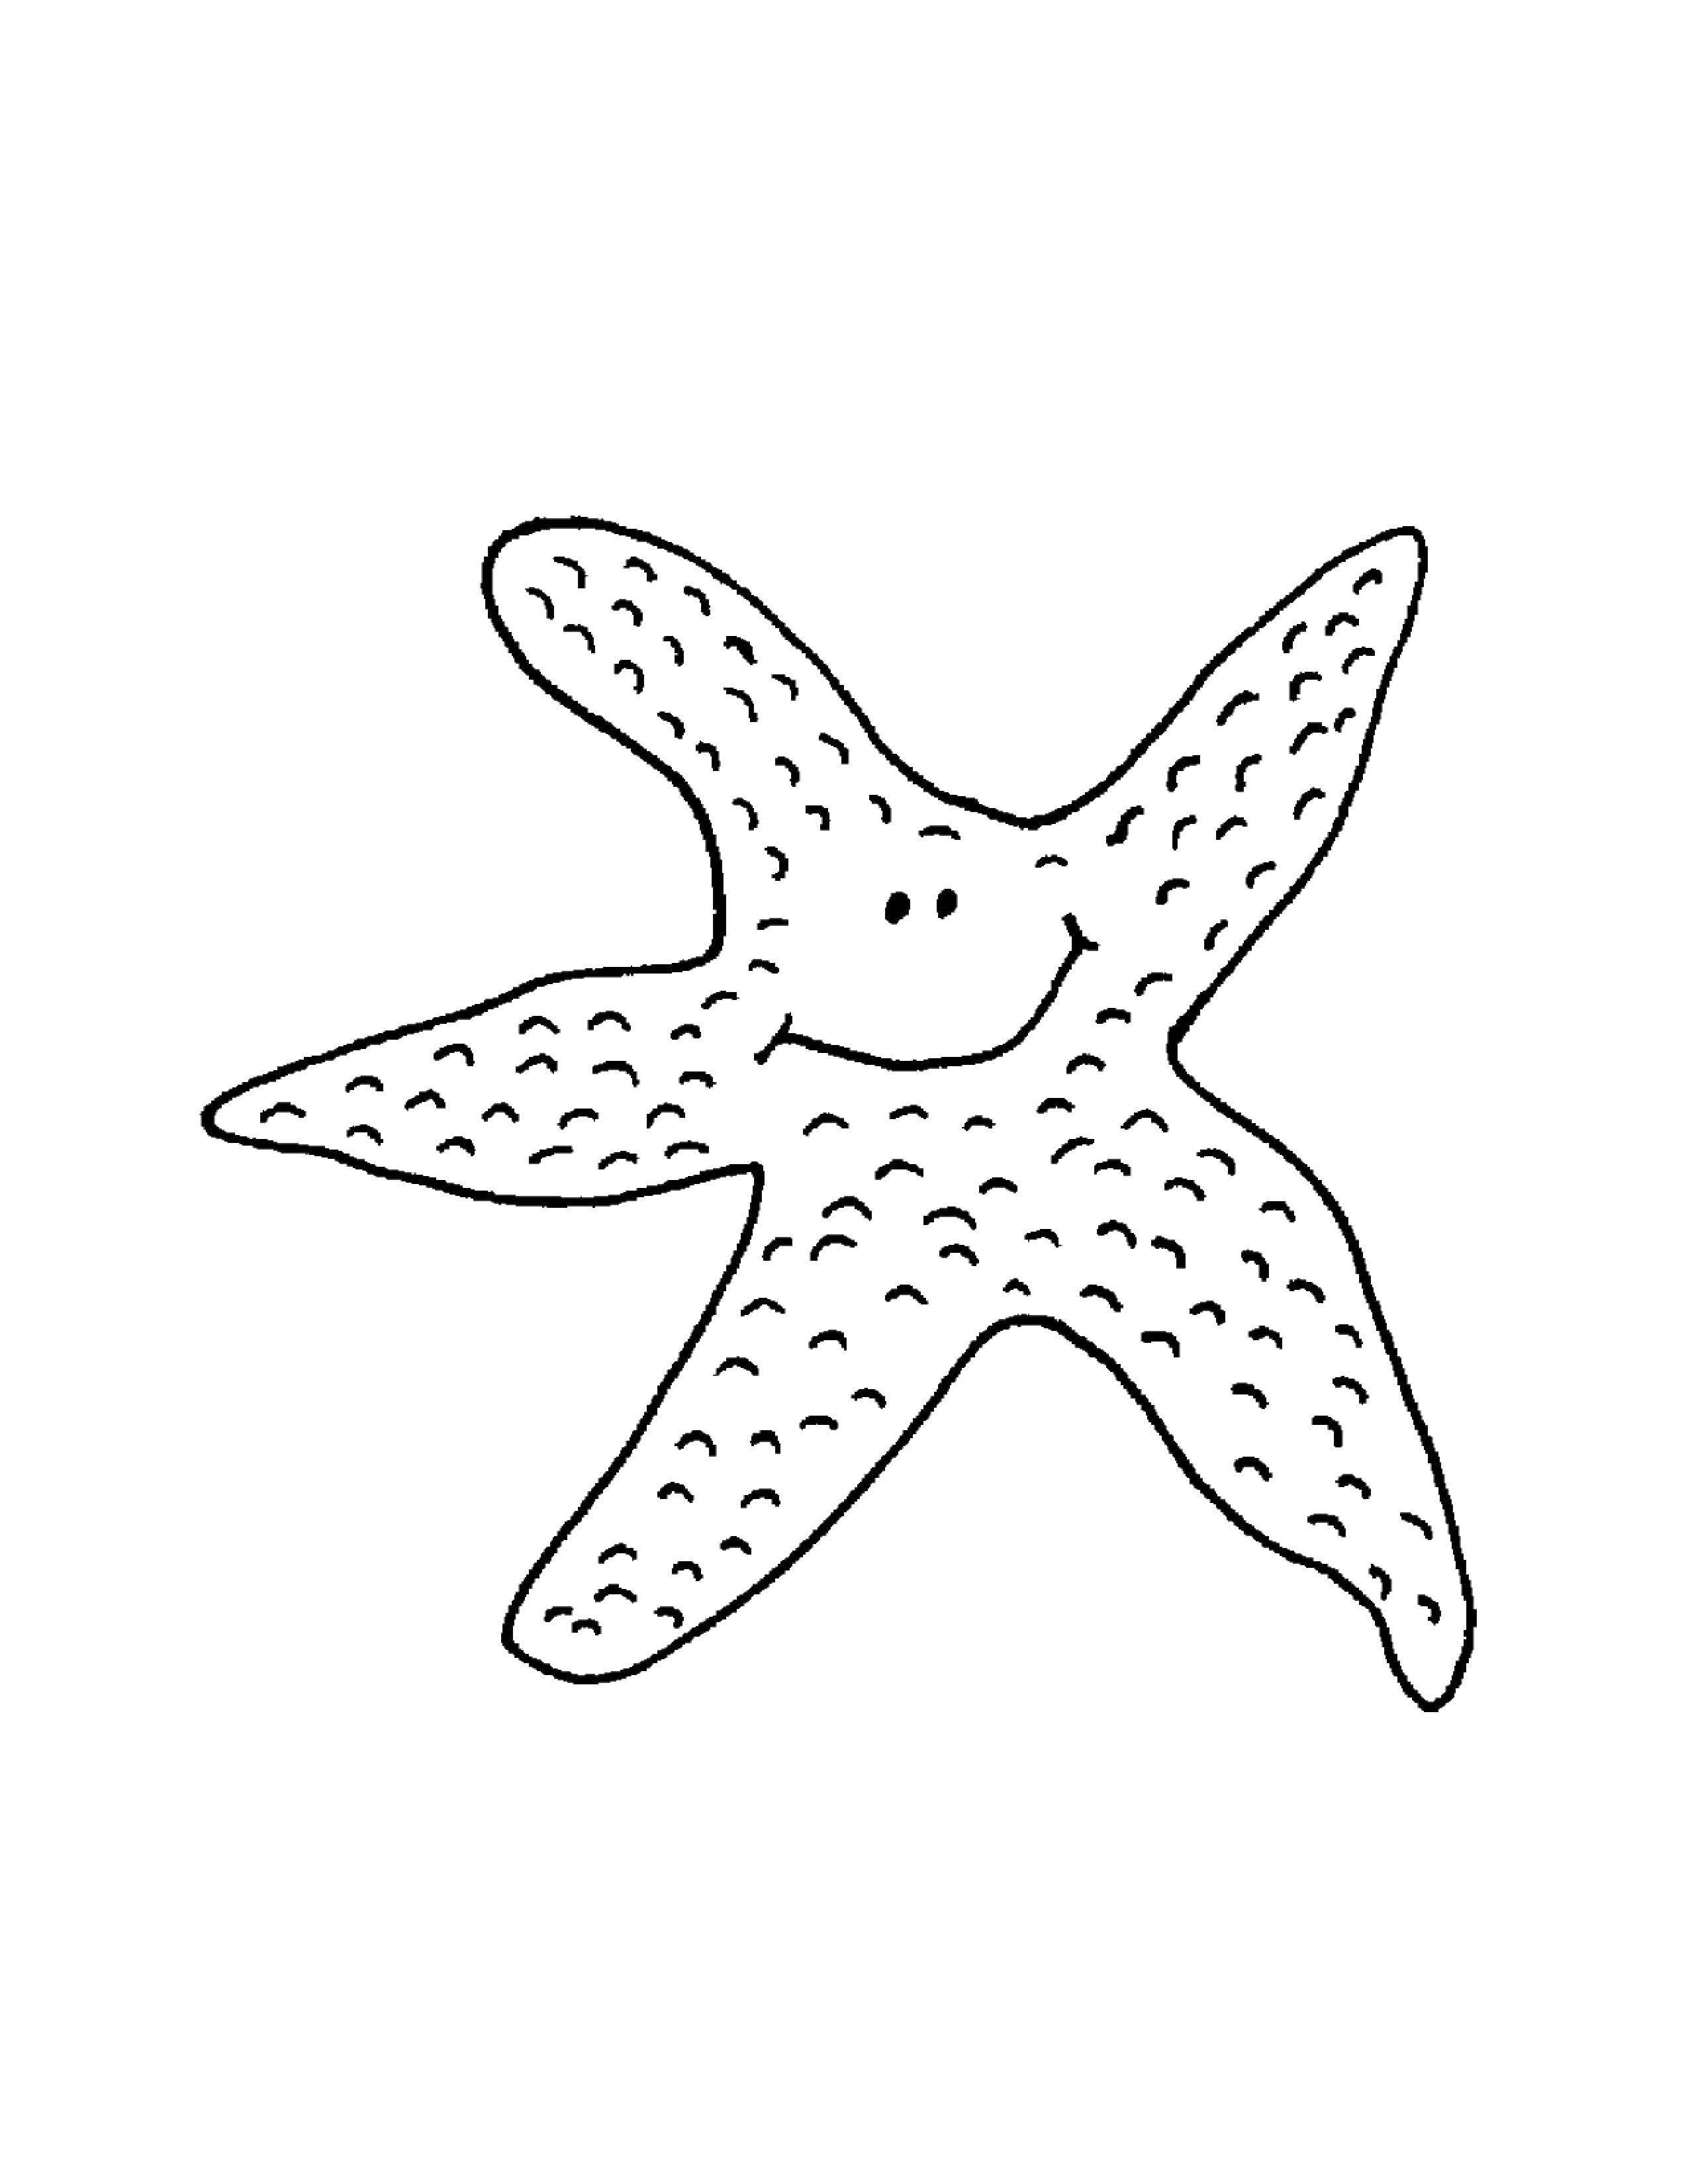 Coloring Starfish happy. Category marine. Tags:  Underwater world.